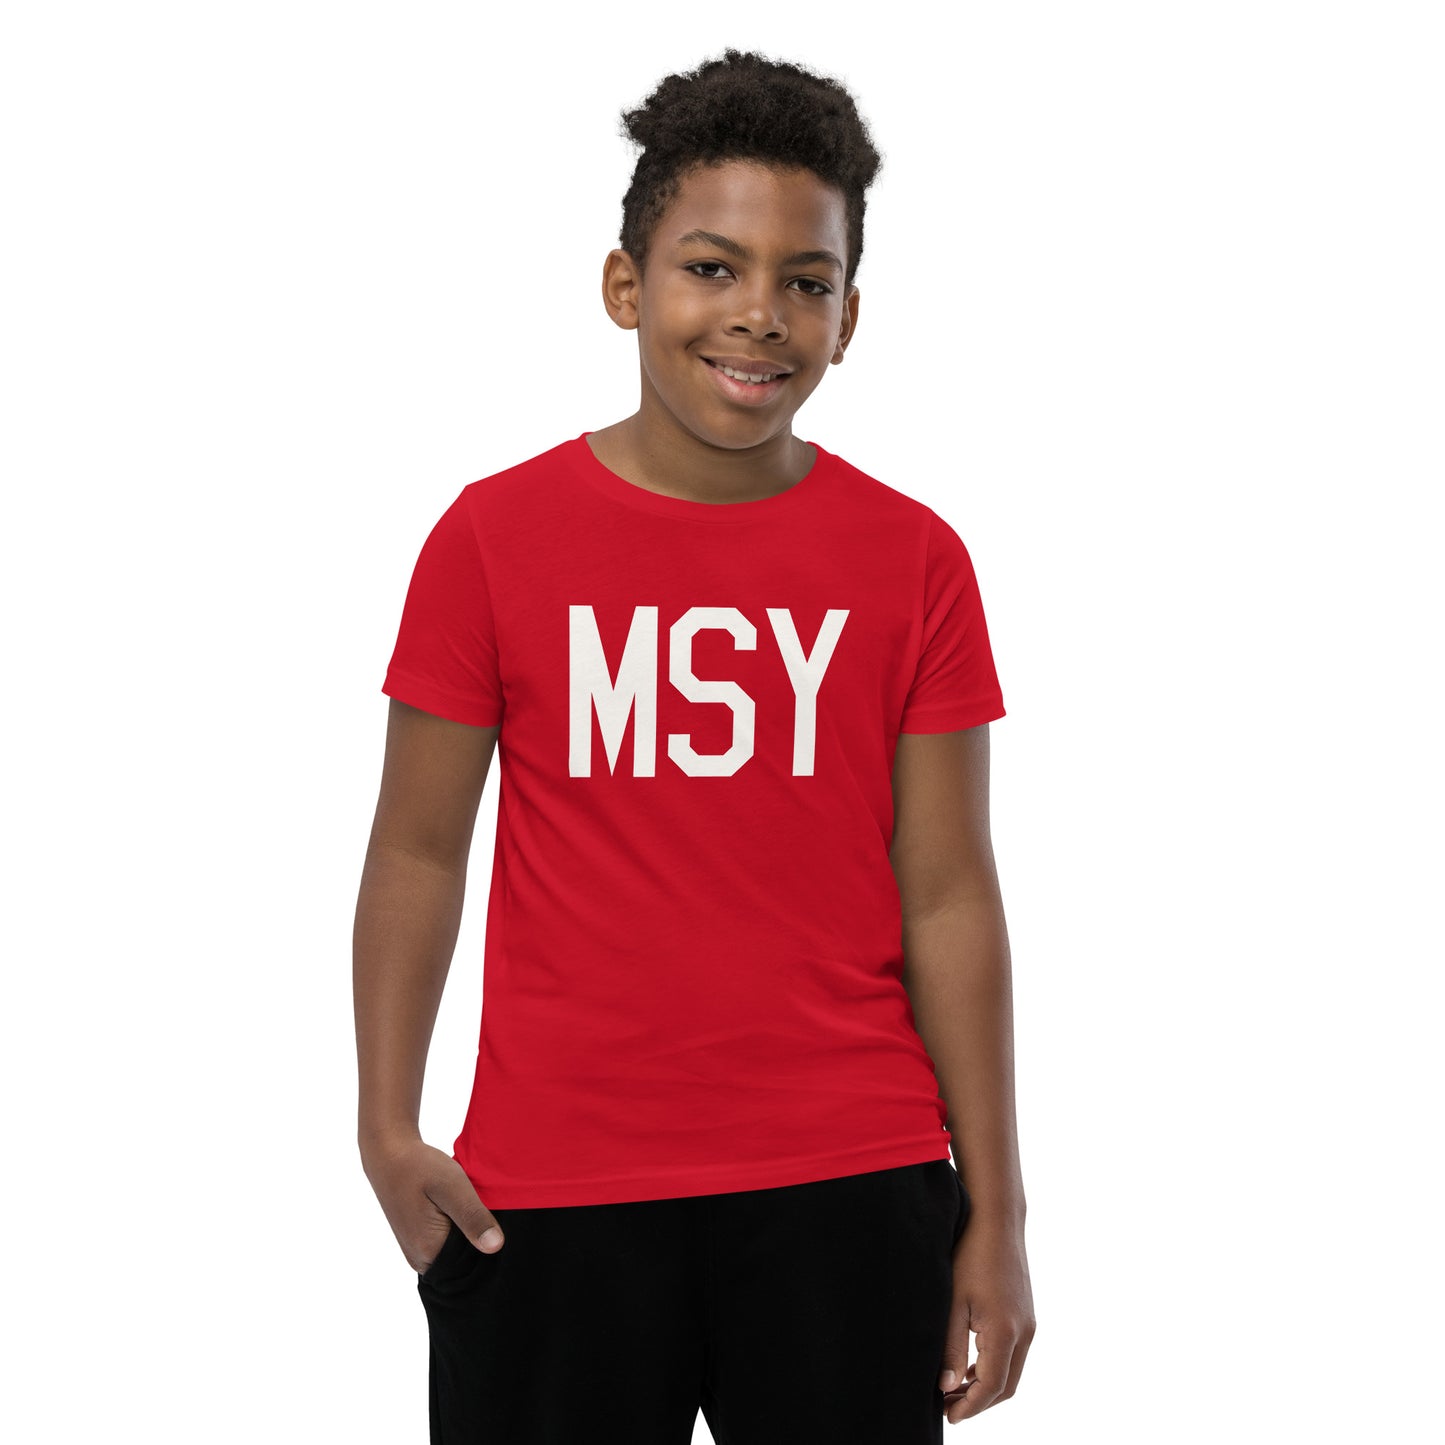 Kid's T-Shirt - White Graphic • MSY New Orleans • YHM Designs - Image 09